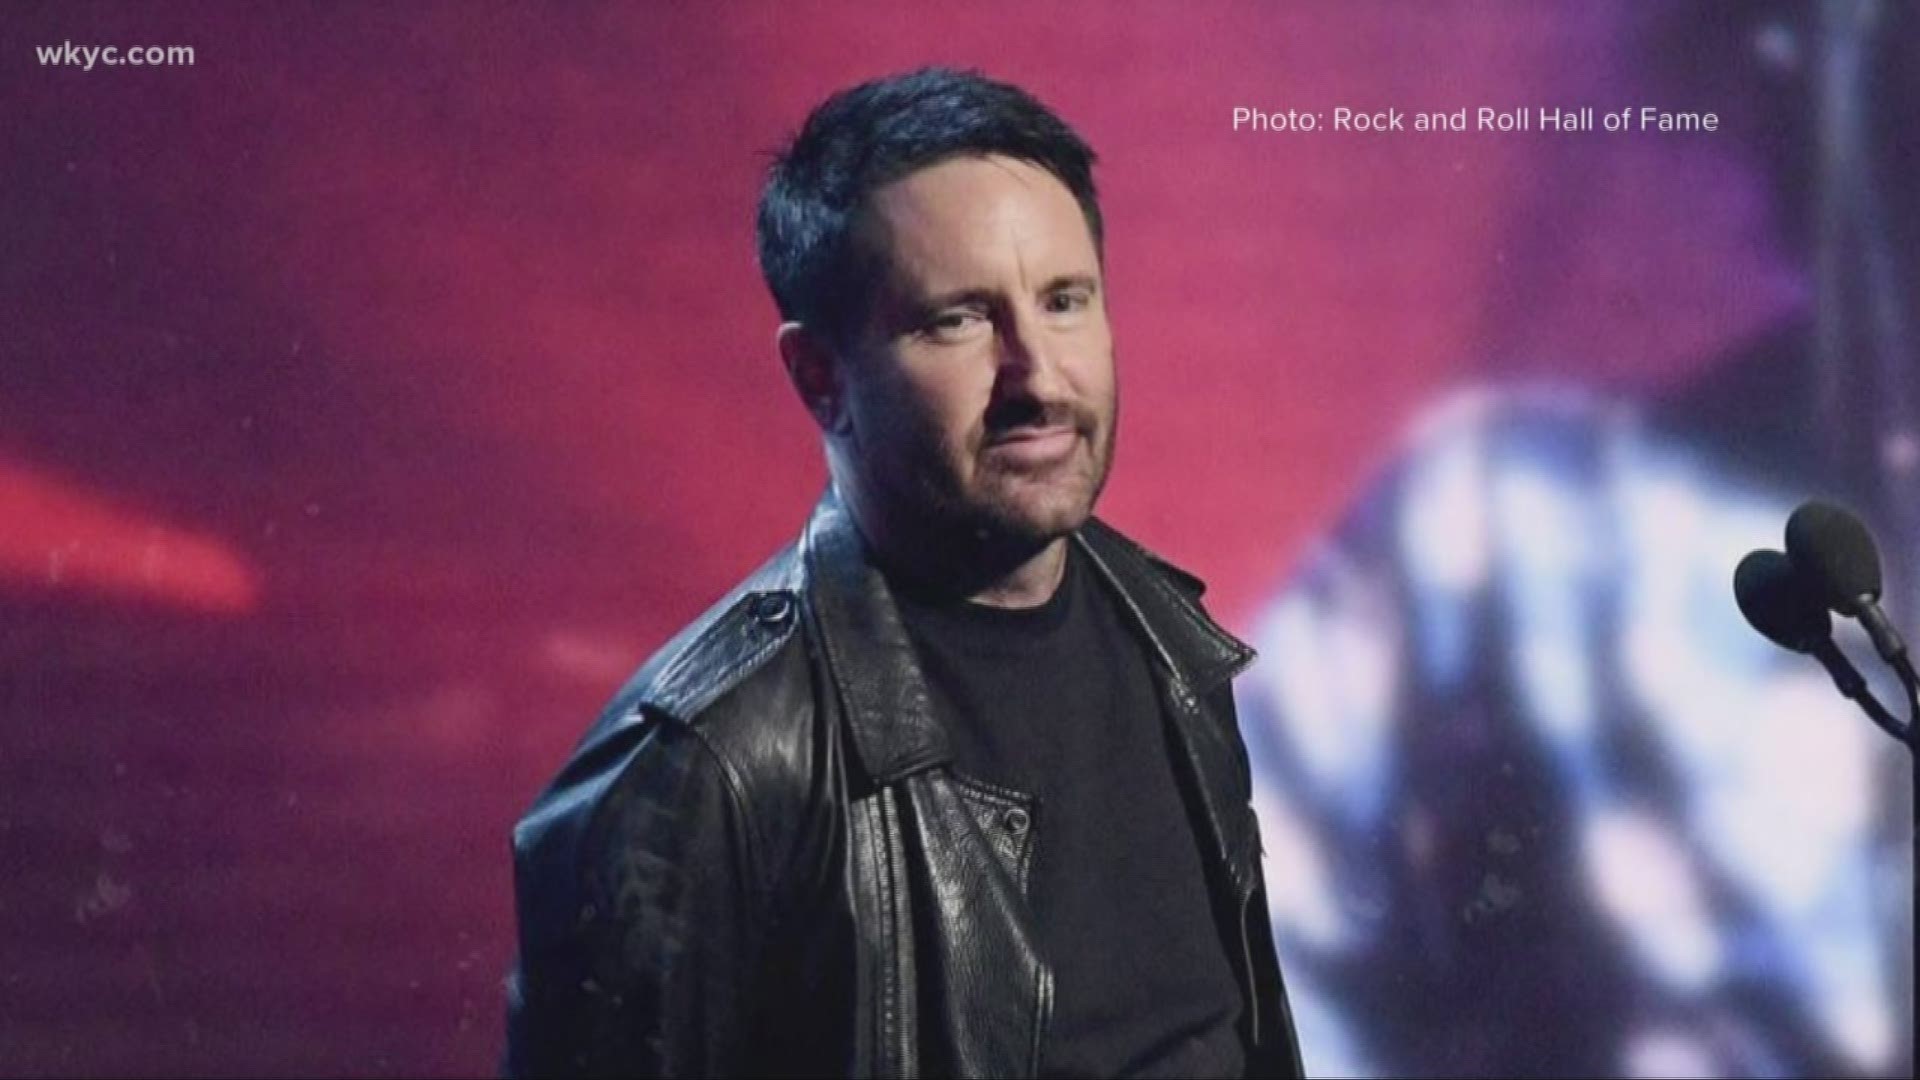 Nine Inch Nails' Trent Reznor got his Rock and Roll Hall of Fame career  started in Cleveland 